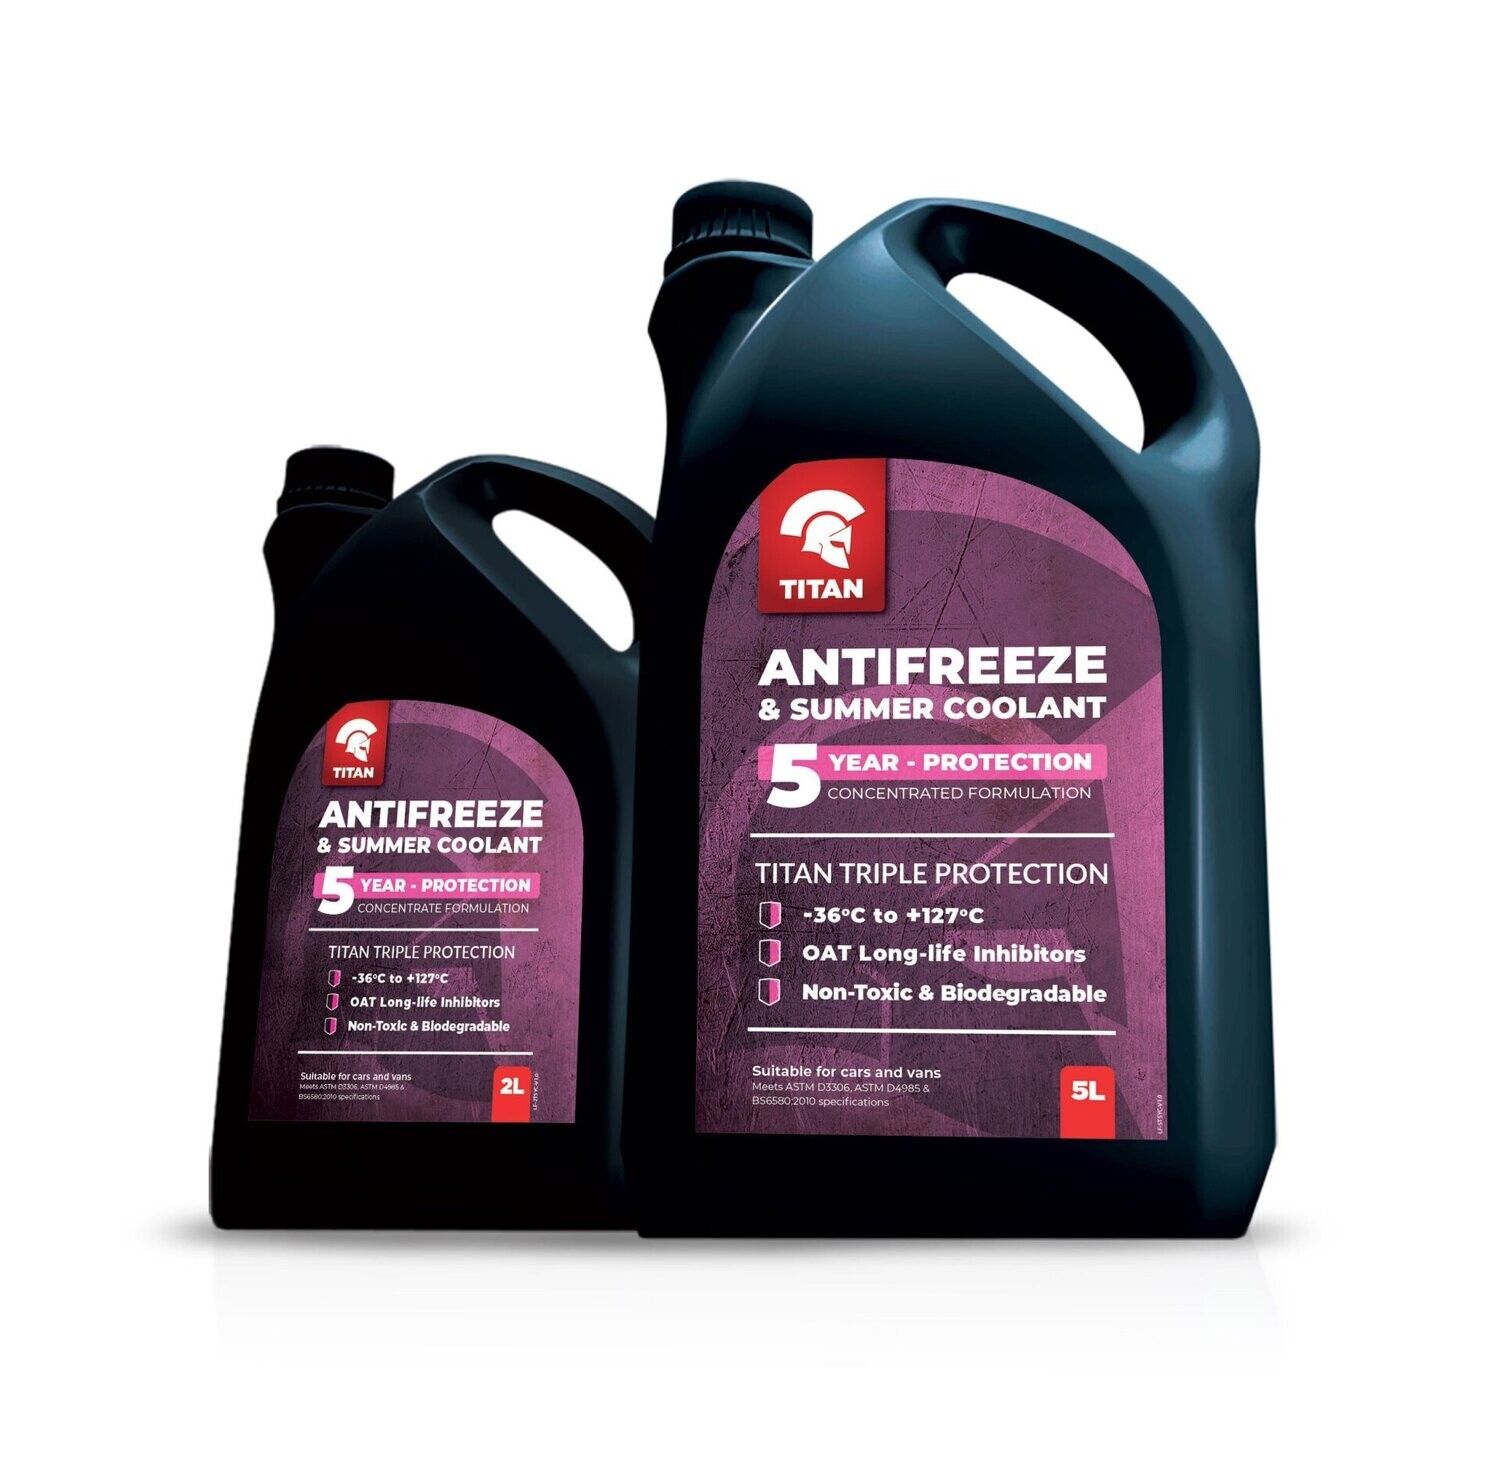 TITAN 5 YEAR ANTIFREEZE AND SUMMER COOLANT 50/50 PREMIX
READY TO USE 5 Litres